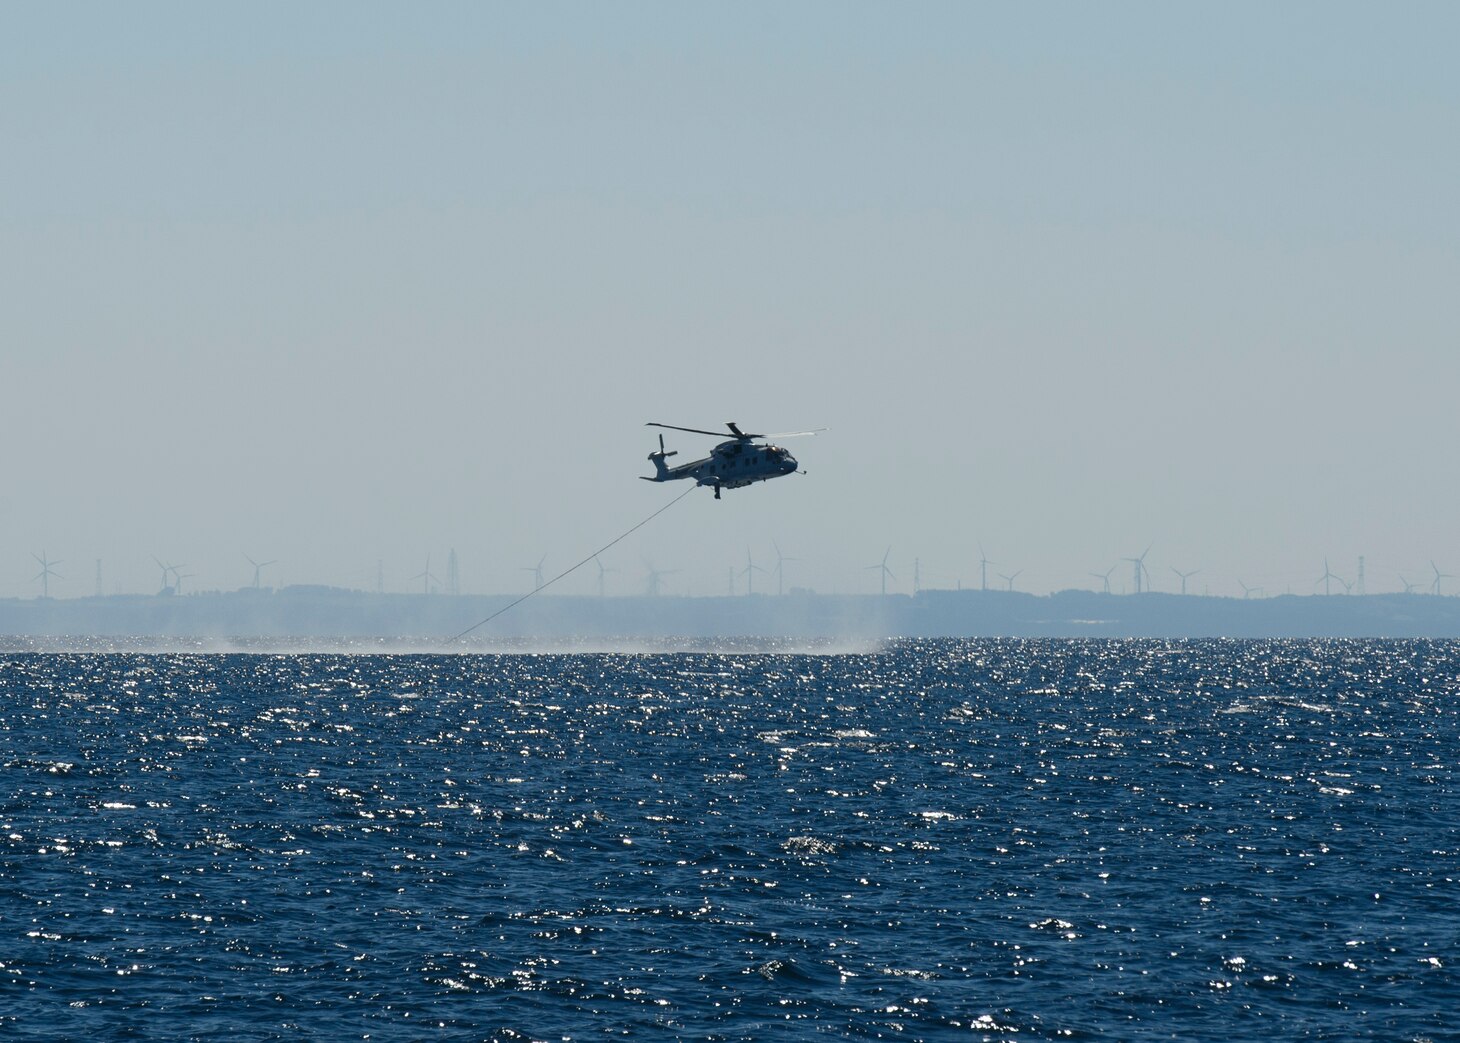 MUTSU, Japan (July 26, 2017) A JMSDF MCH-101 mine warfare helicopter rakes for mines in Mutsu Bay during 2JA 2017 Mine Countermeasures Exercise (2JA-17 MCMEX). 2JA Mine Countermeasures Exercise is an annual bilateral exercise held between the U.S. Navy and Japanese Maritime Self Defense Force to strengthen interoperability and increase proficiencies in mine countermeasure operations.